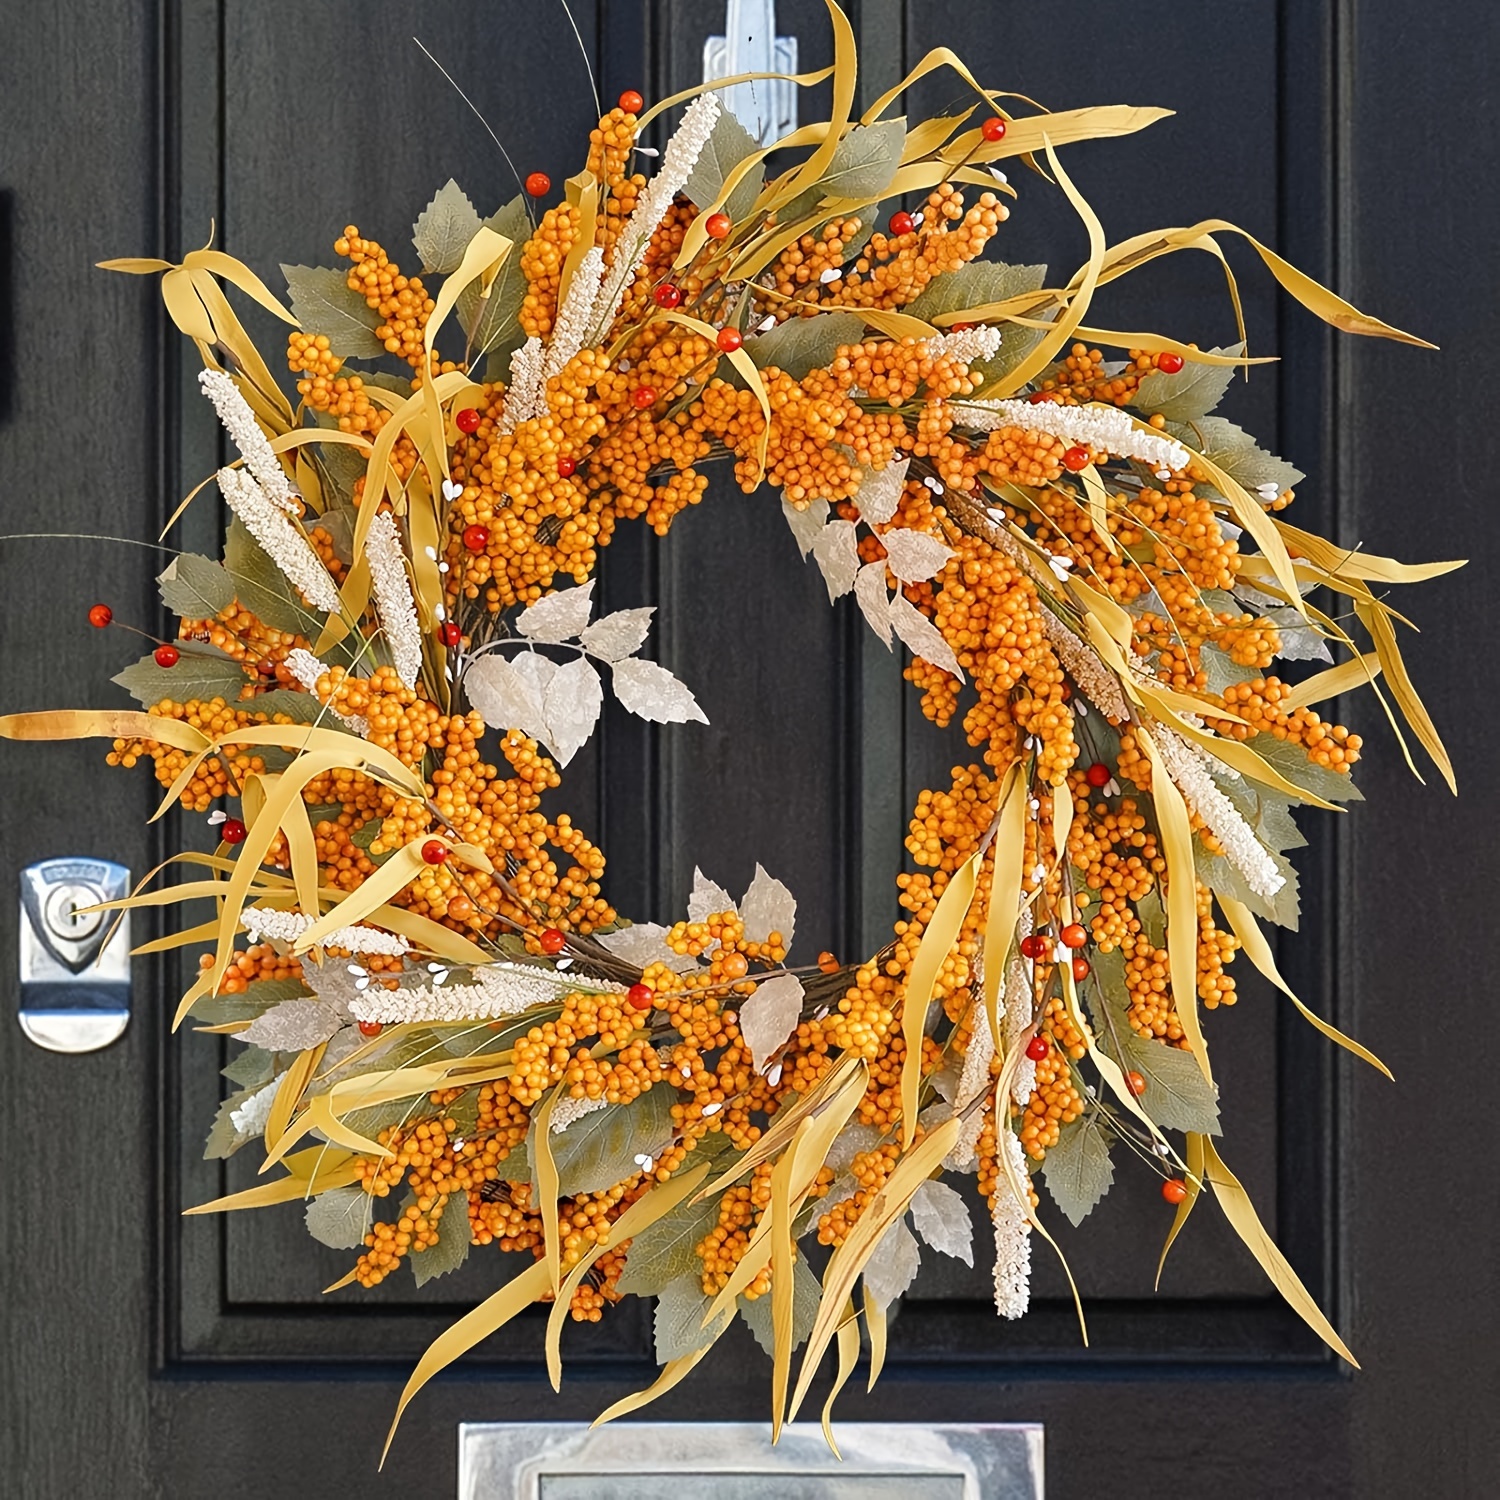  Fall Peony and Pumpkin Wreath Fall Wreaths for Front Door Year  Round Wreath Thanksgiving Decor, Artificial Autumn Wreath with Maple Leaf  Berry Pumpkin Pine-Cone Harvest for Home (15.75 inches) : Home